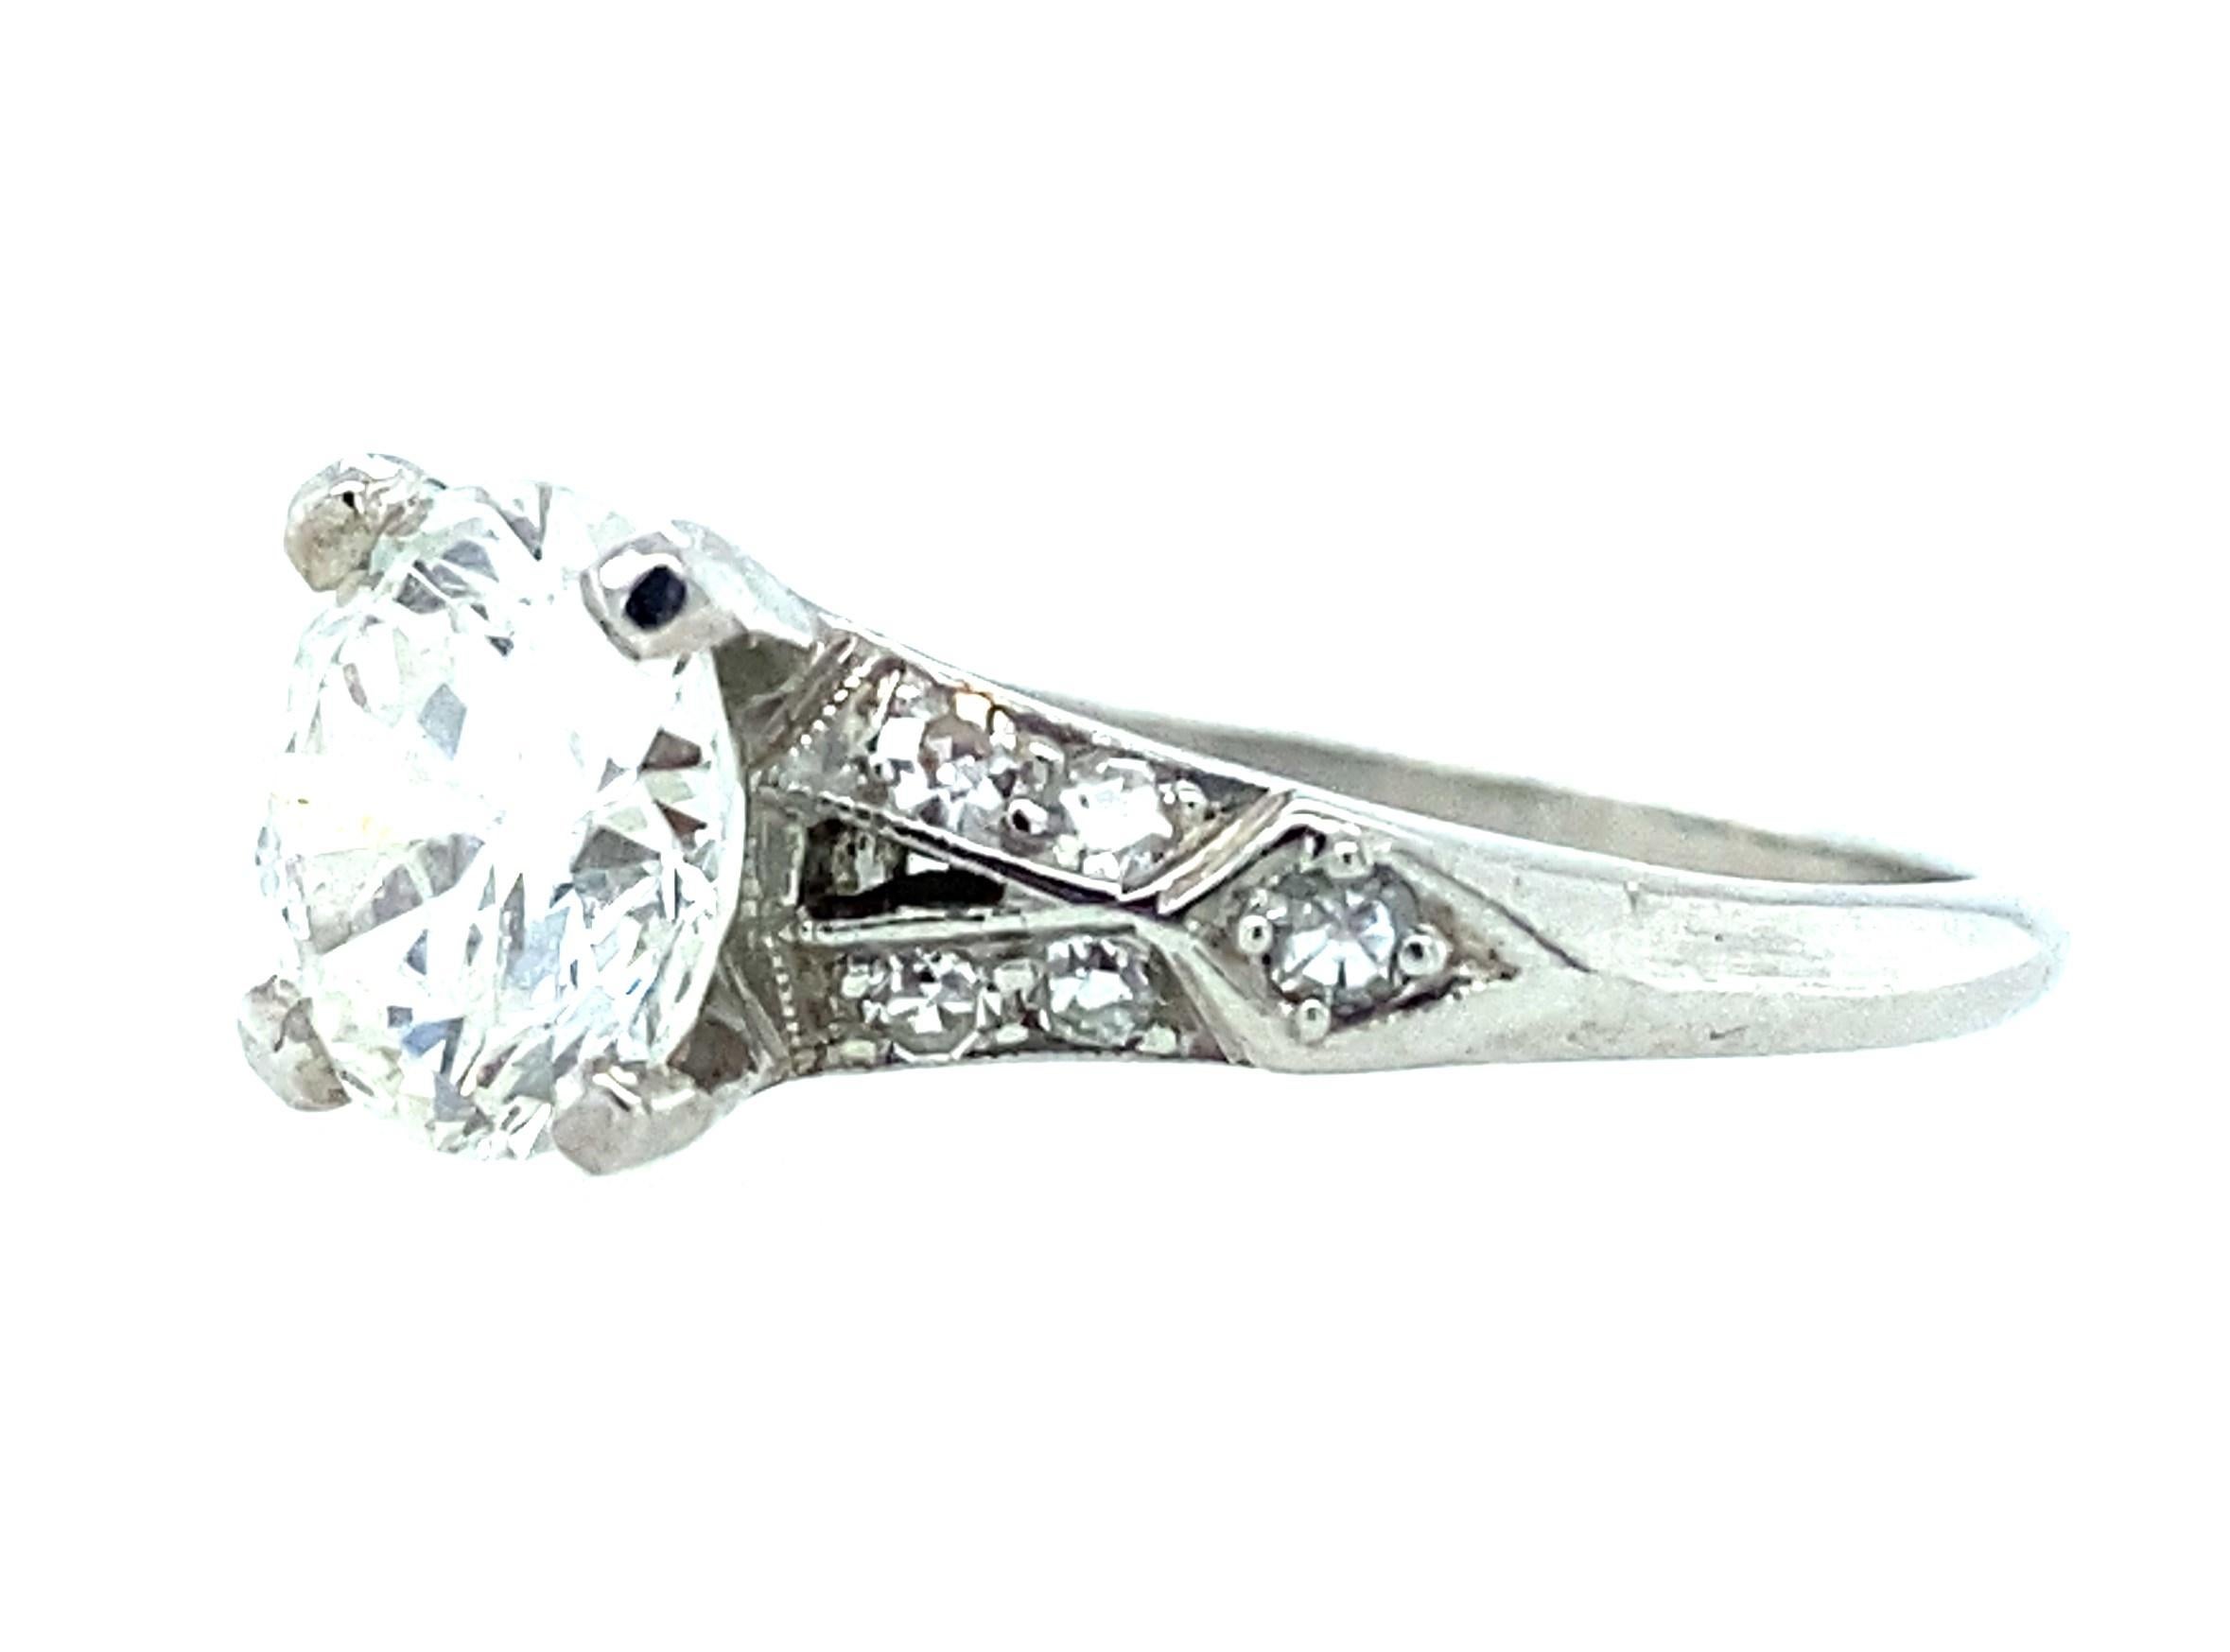 If you are looking for an Art Deco engagement ring with major 